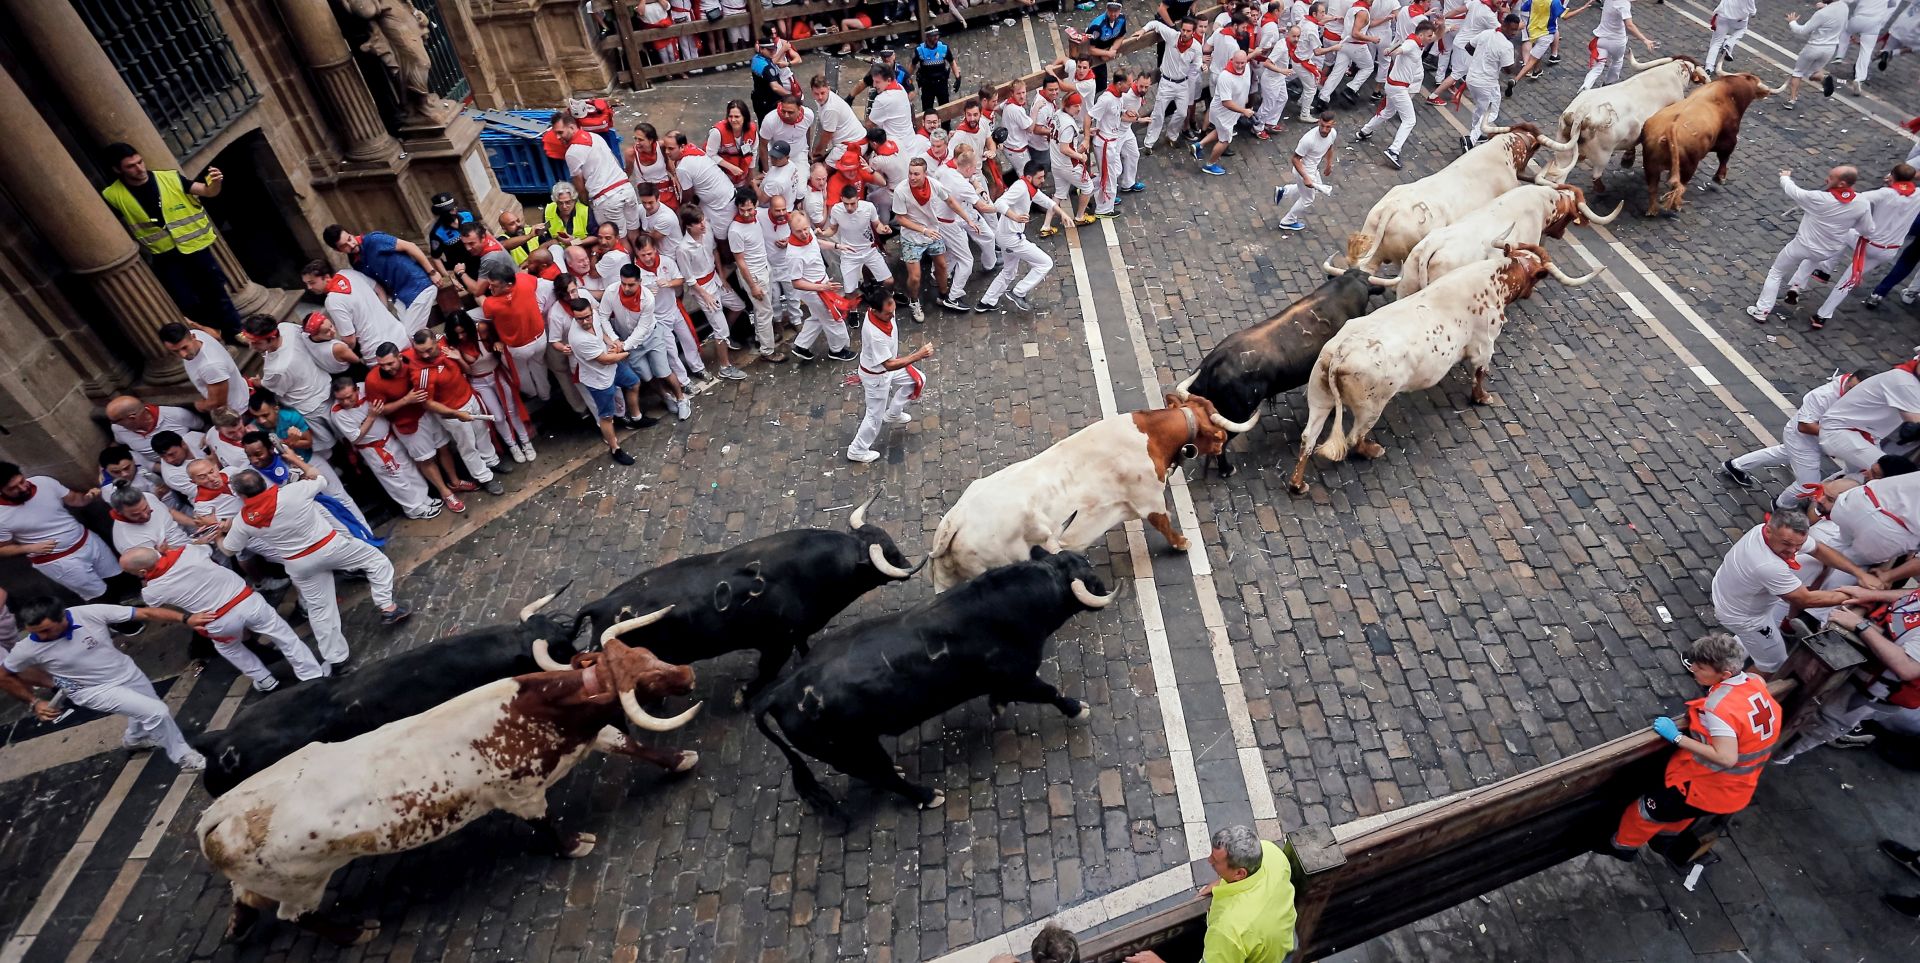 epa07700725 Bulls of the Puerto de San Lorenzo bull ranch run down a street during the traditional San Fermin bull run in Pamplona, Spain, 07 July 2019. The festival, locally known as Sanfermines, is held annually from 06 to 14 July in commemoration of the city's patron saint. Hundreds of thousands of visitors from all over the world attend the fiesta, with many of them physically participating in the highlight event - the running of the bulls, or encierro.  EPA/JAVIER LIZON